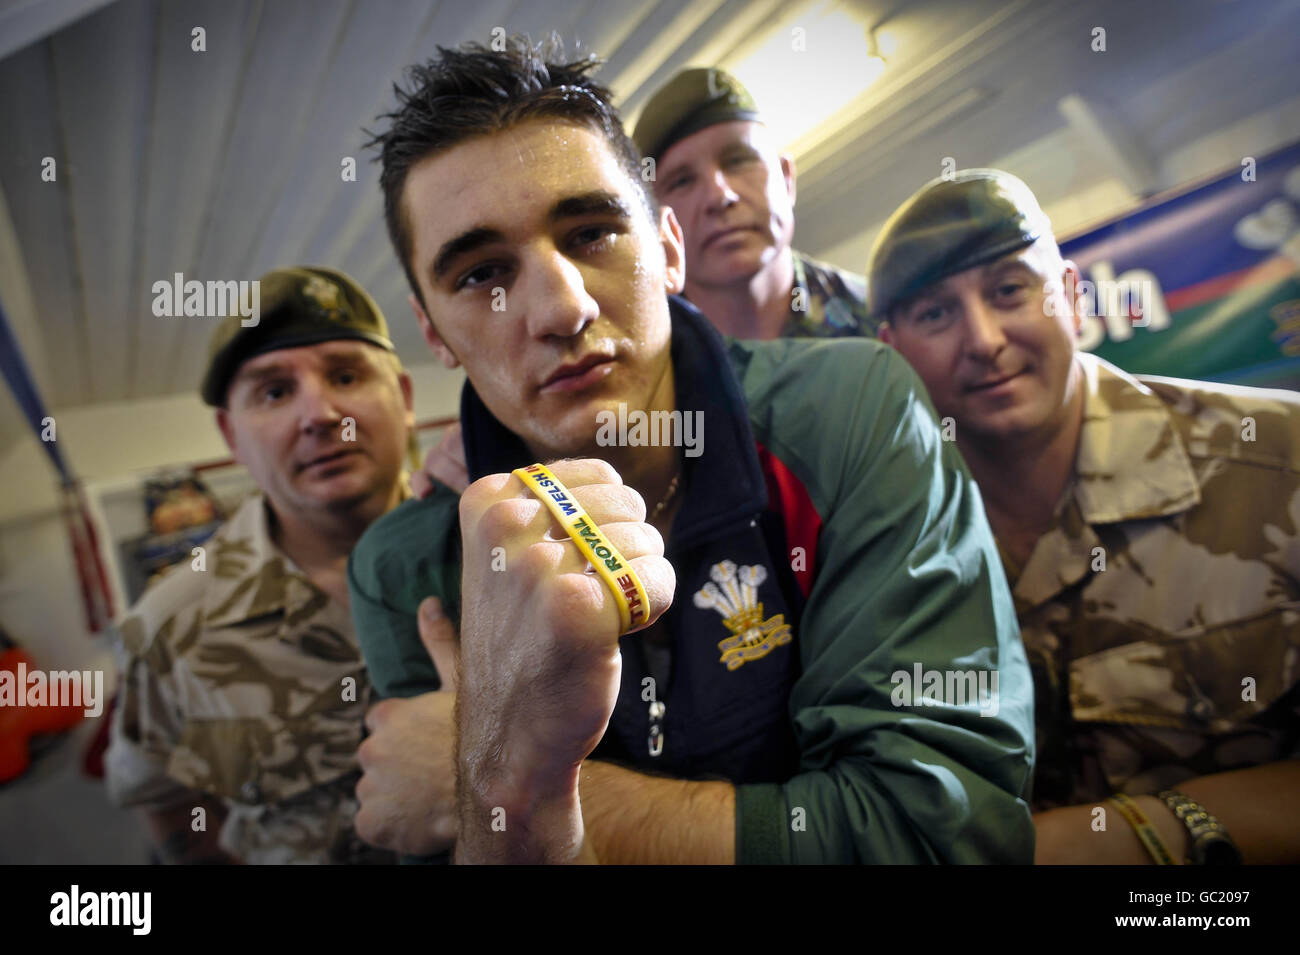 British and Commonwealth Light-Heavyweight Champion Nathan Cleverly, who defends his commonwealth title at Belfast's Odyssey Arena on October 9, is pictured with soldiers from the Royal Welsh regiment, (left to right) Captain Rob Rees, Warrant Officer class 2 Mal Kellheer-Griffiths and Warrant Officer class 2 Dave Matthews, as Nathan shows his support for the The Royal Welsh and the great job they are doing by fully endorsing 'The Soldiers Charity' and wearing the 'Support the Royal Welsh in Afghanistan' wrist band. Stock Photo